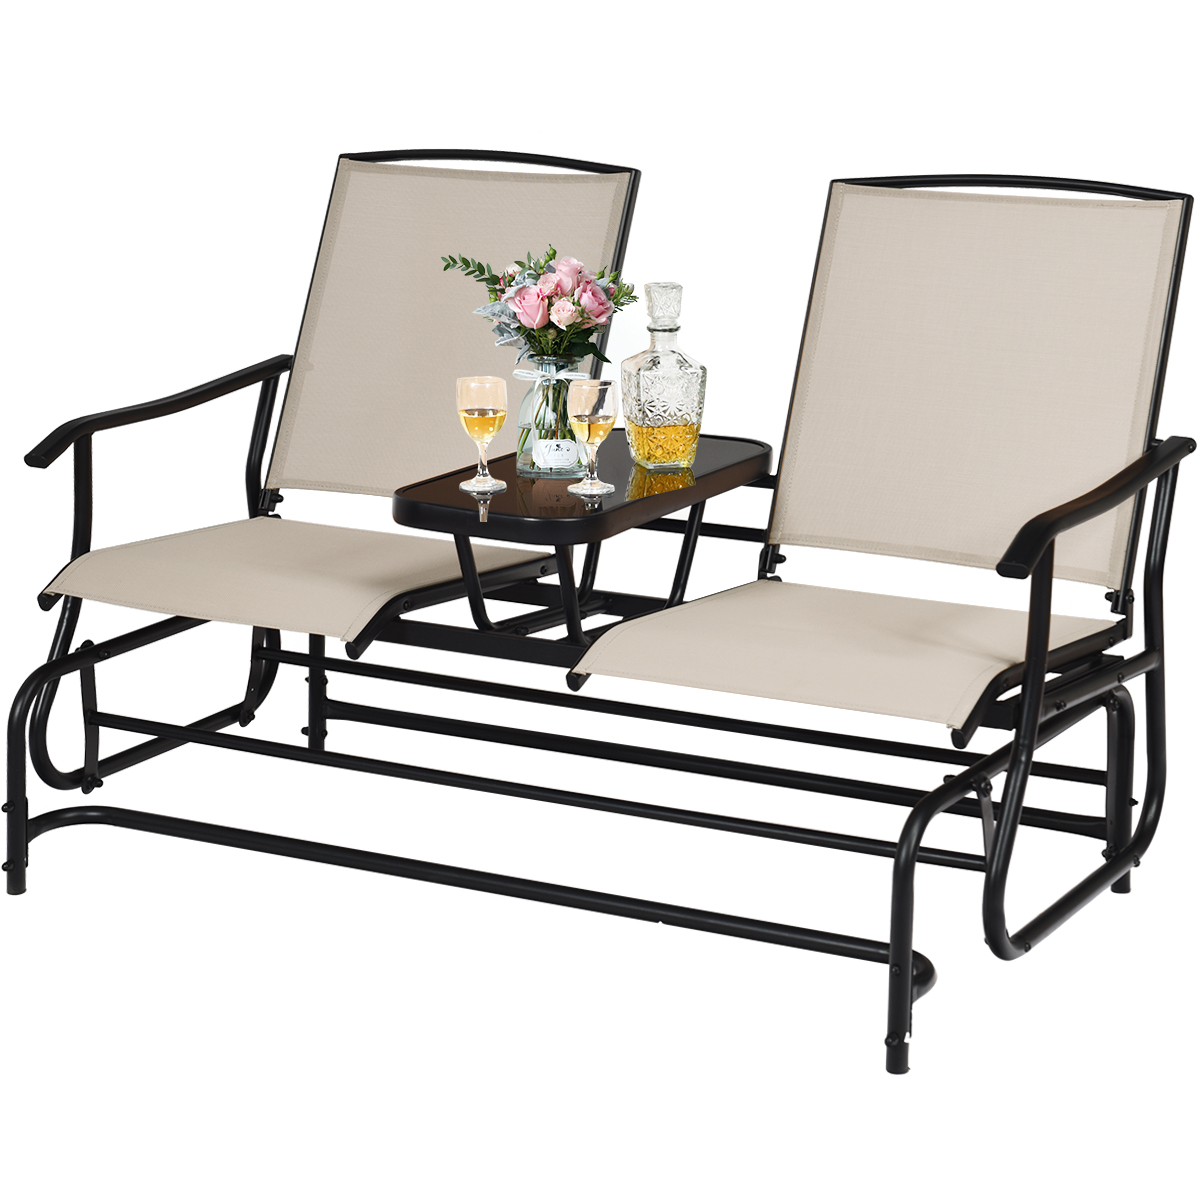 Costway 2 Person Patio Double Glider Steel Frame Loveseat Rocking with Center Table - image 1 of 9